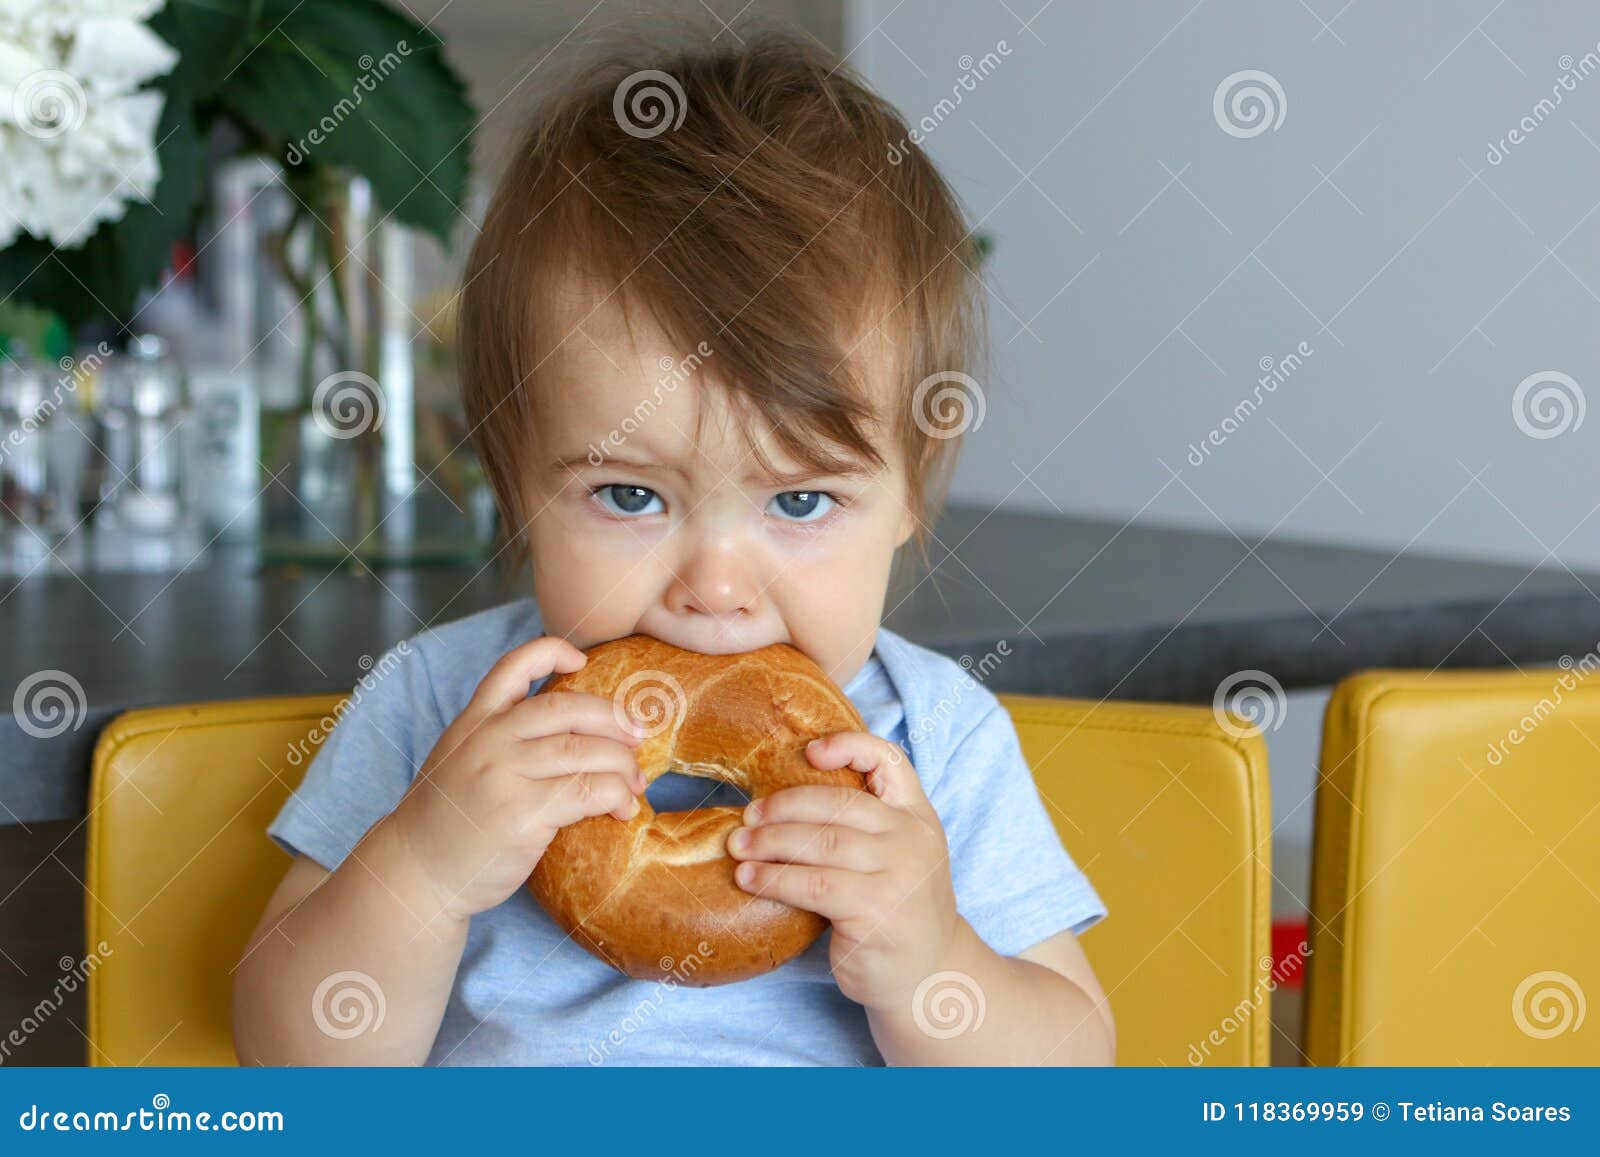 Portrait of Cute Baby Boy with Stylish Haircut Holding and Eating ...